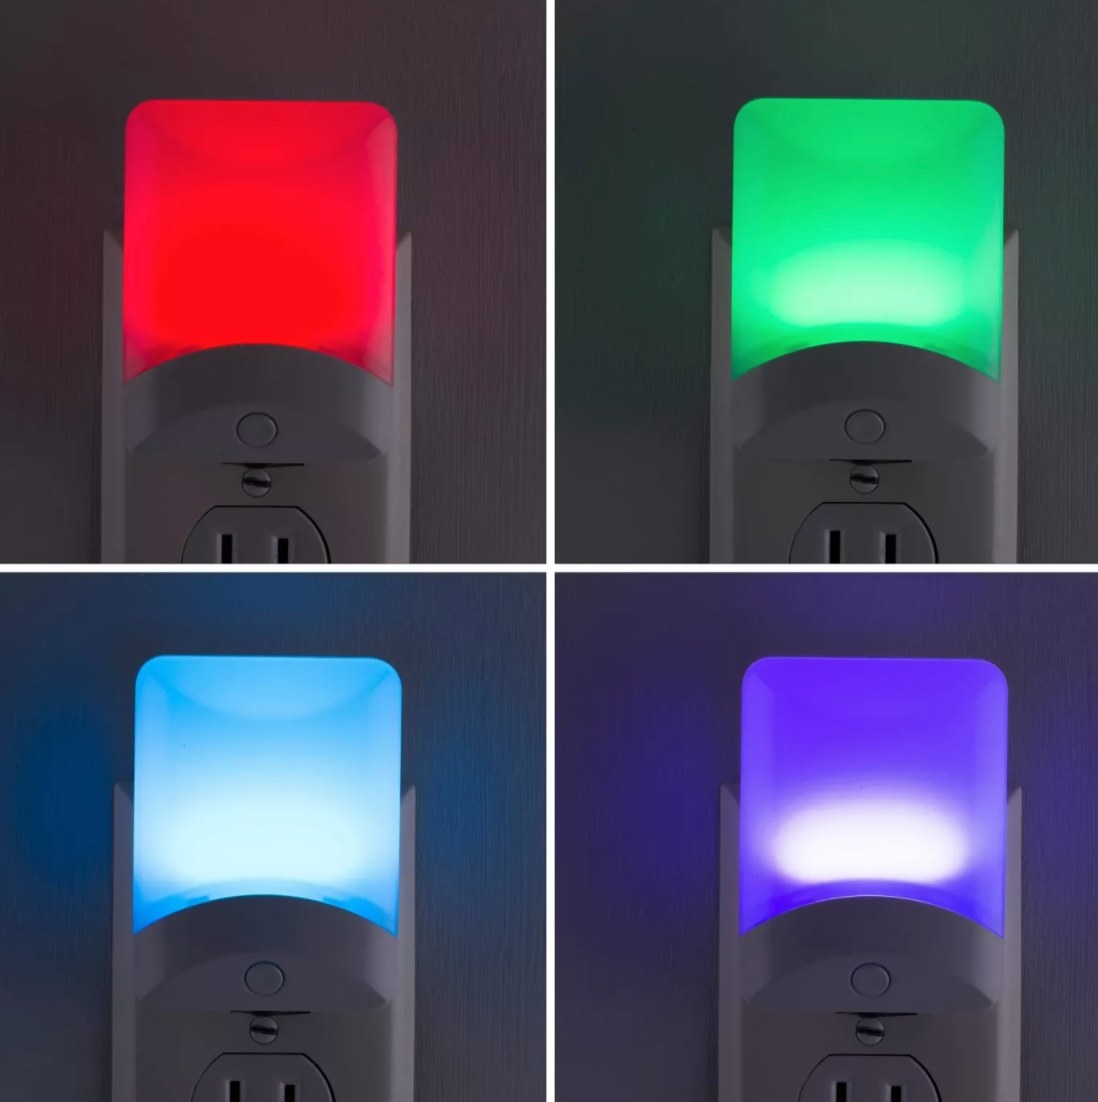 The color-changing night light